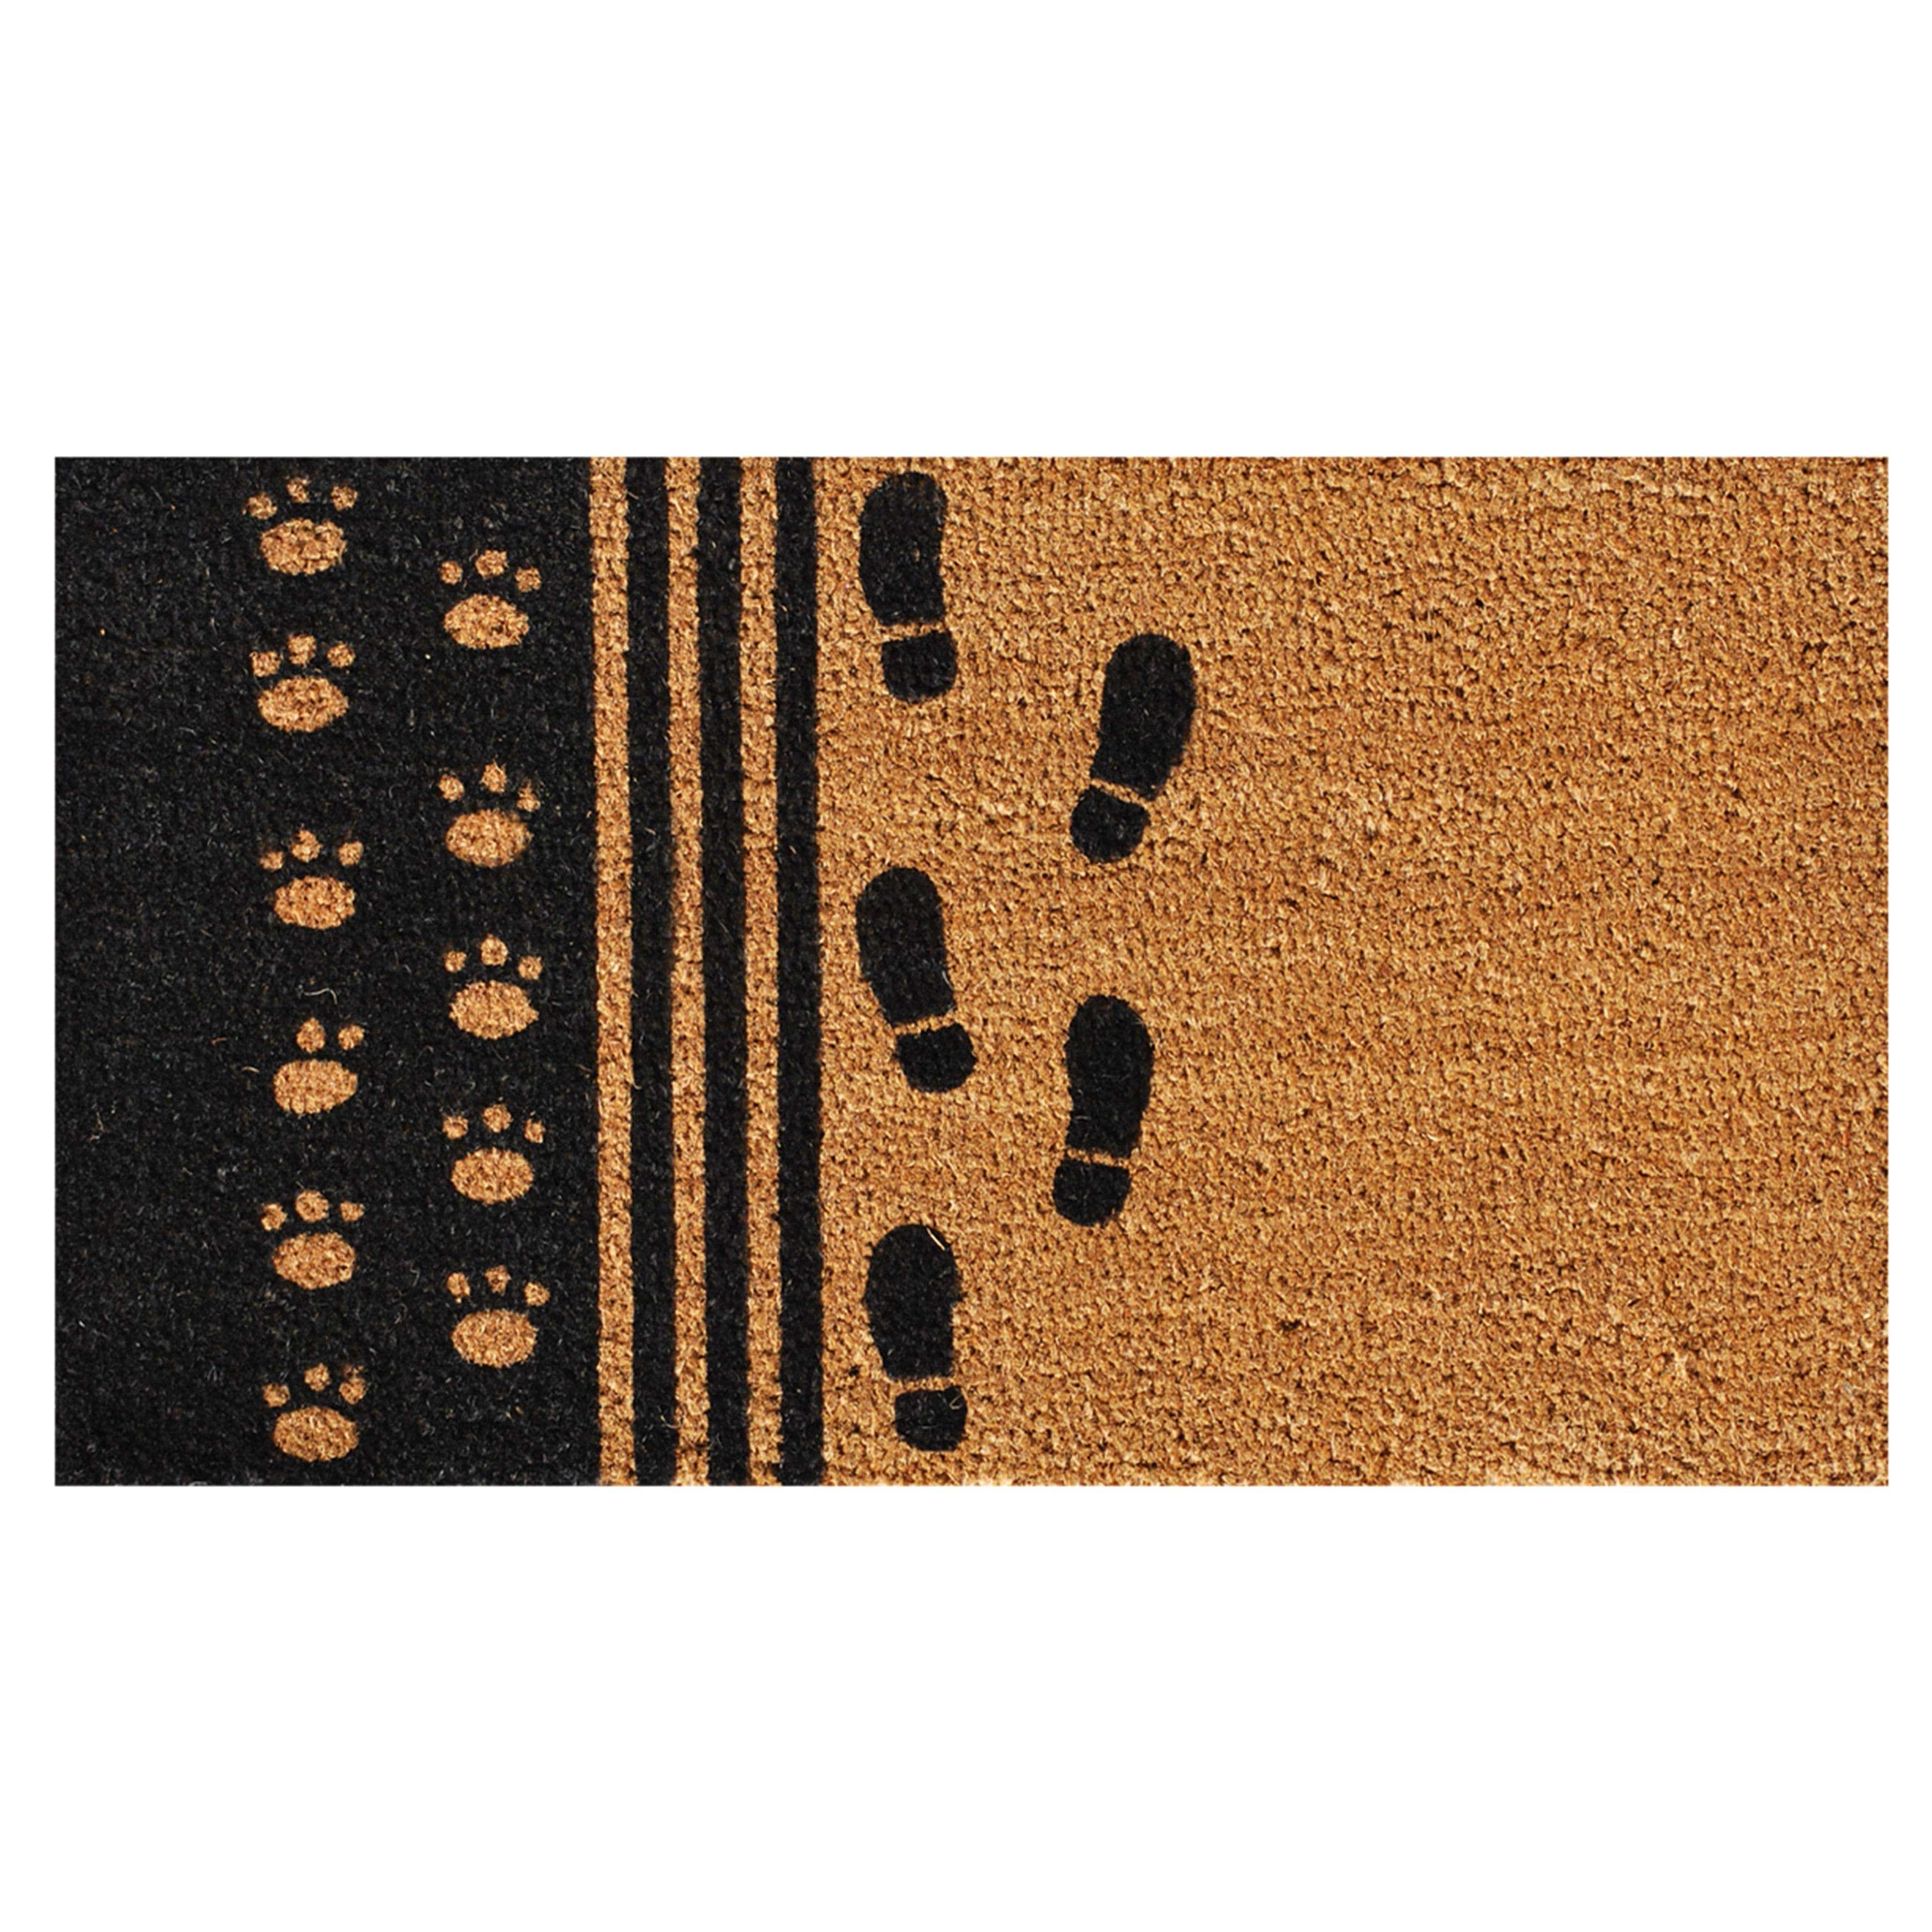 Man's Best Friend Sweet Doormat for Dog Lovers - The Pink Pigs, A Compassionate Boutique